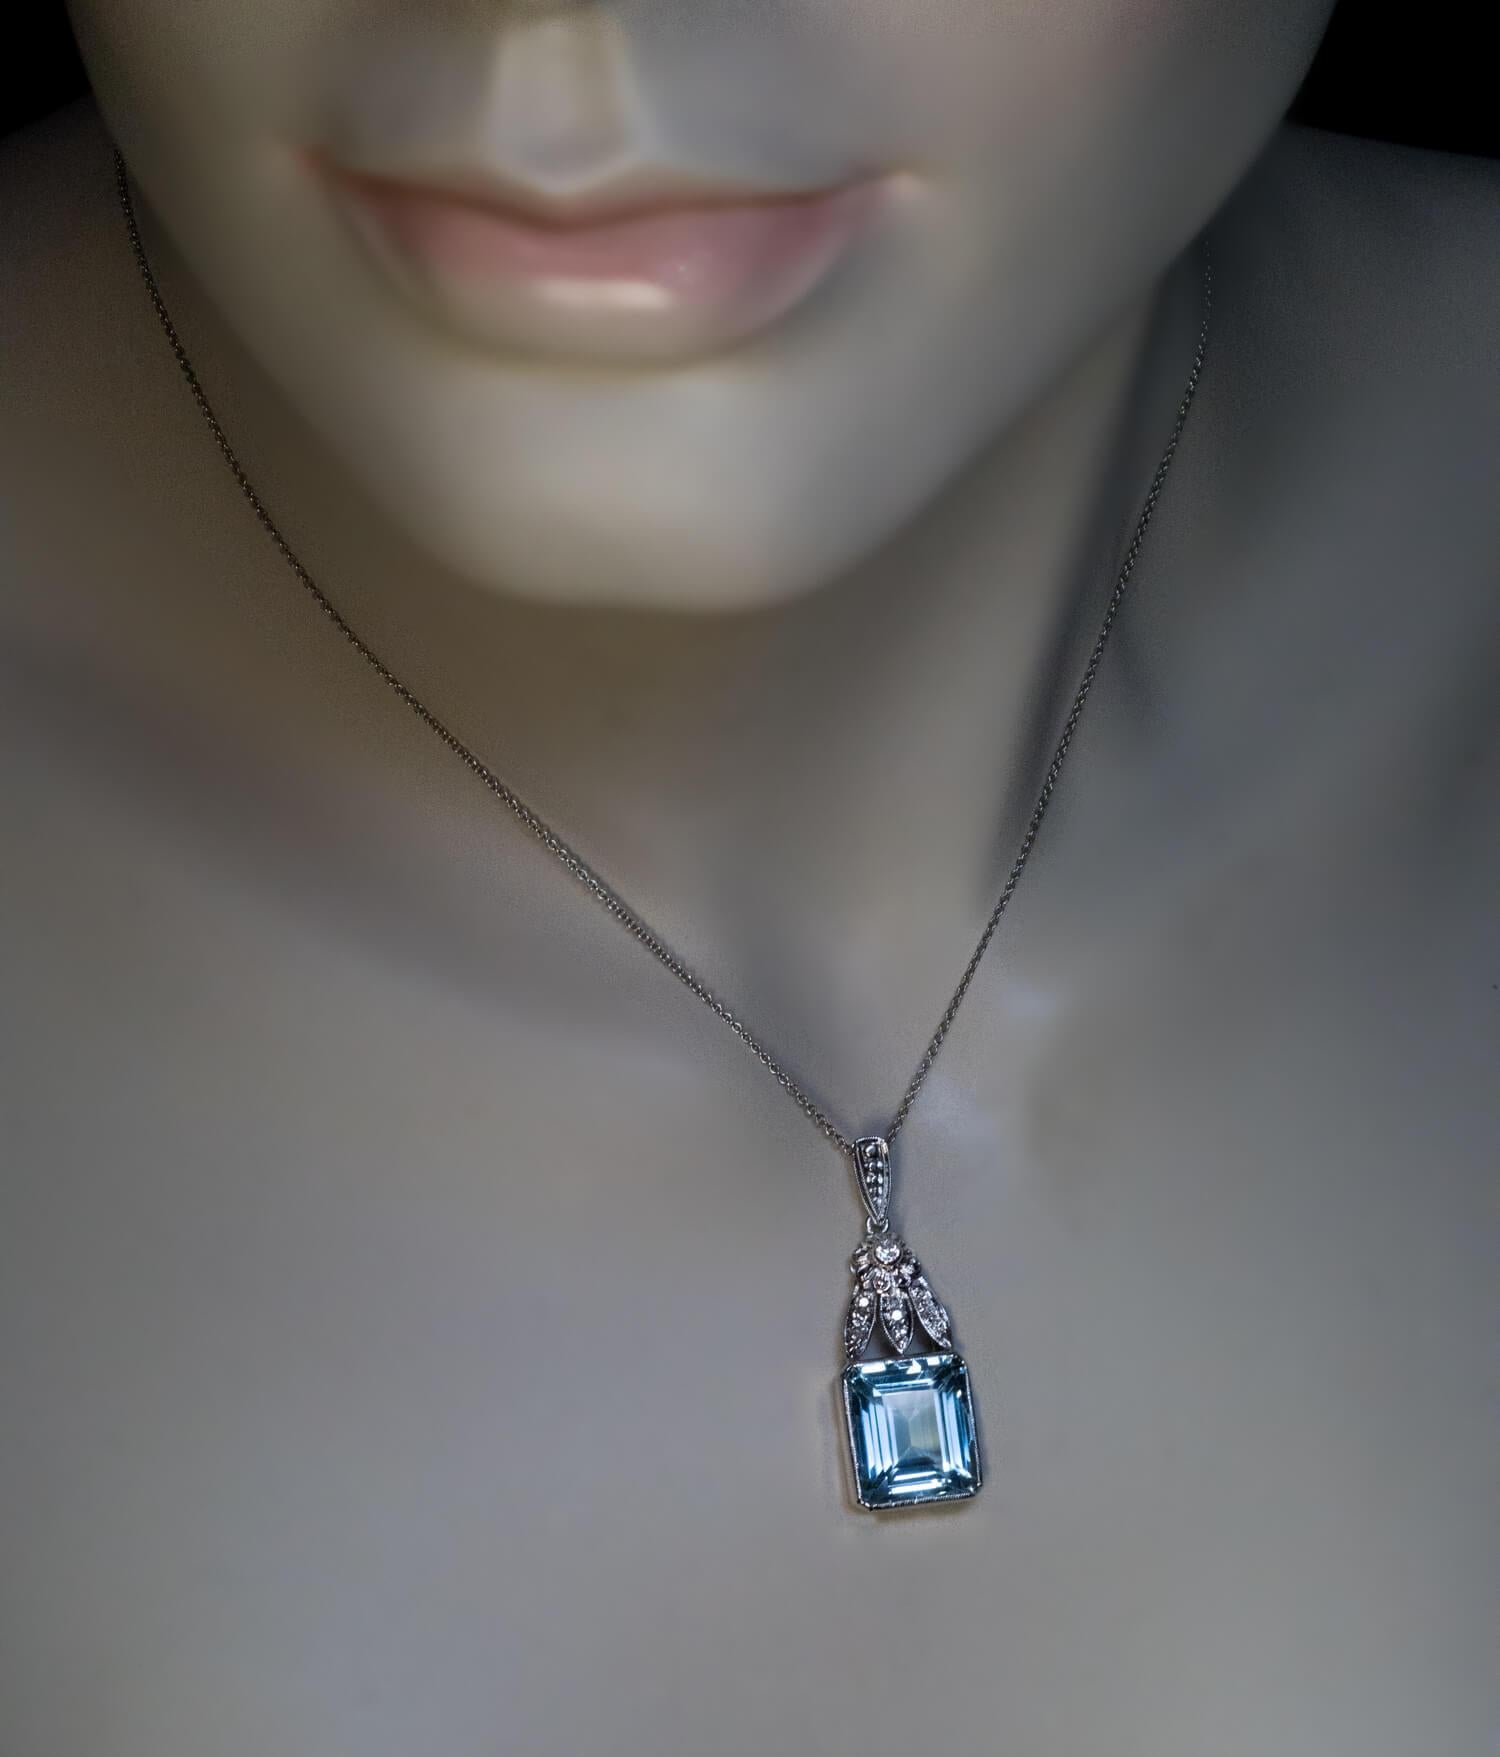 Circa 1950s

The 18K white gold necklace features a bezel-set emerald cut aquamarine of a cool blue color surmounted by three leaves and a flower head embellished with small diamonds.

The aquamarine measures 13.4 x 11.5 x 8.1 mm and is